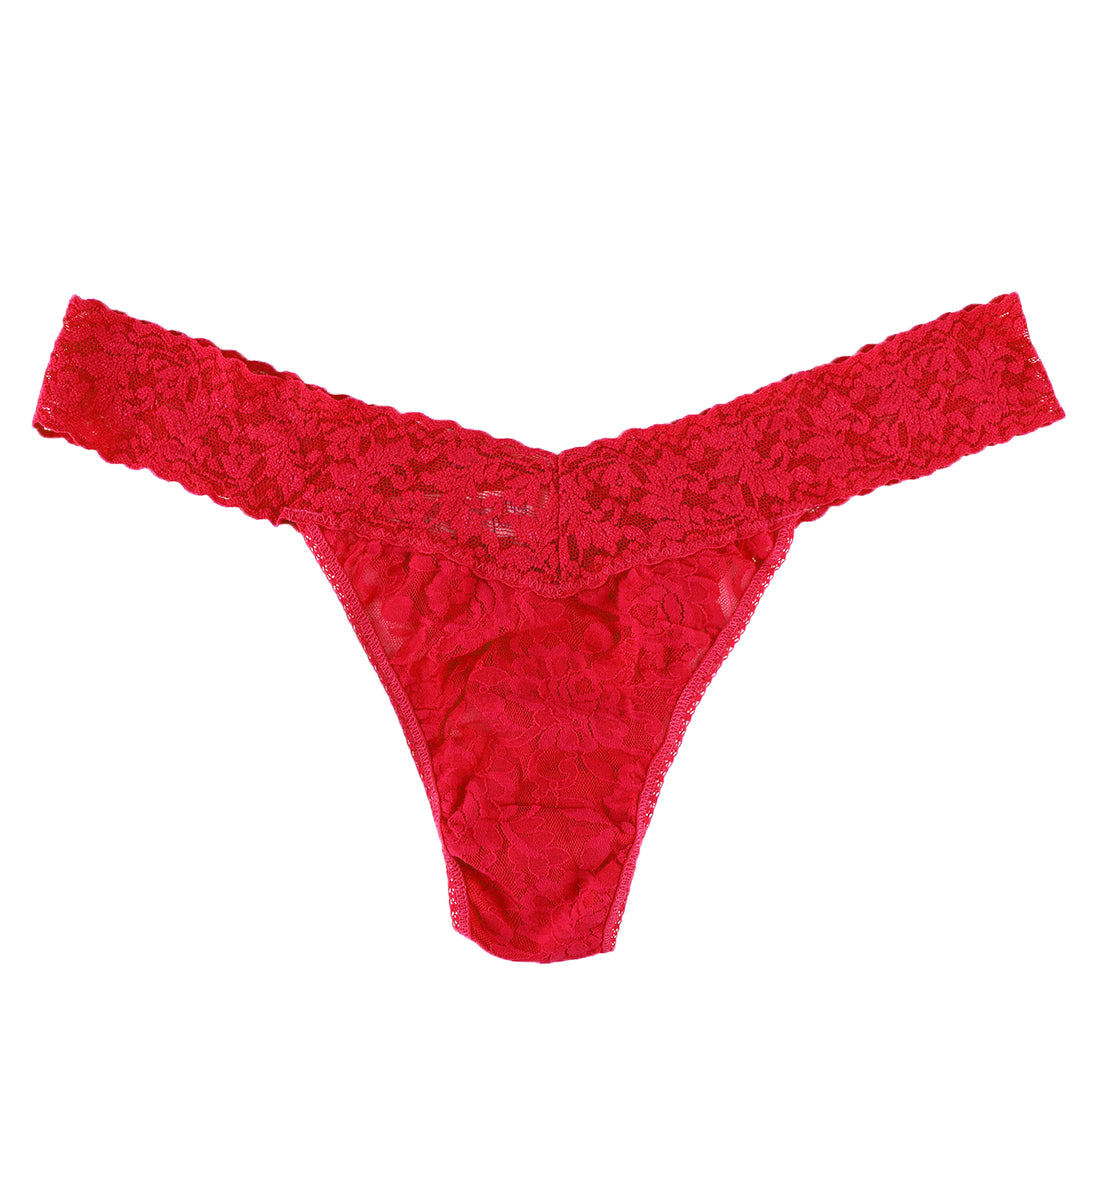 Hanky Panky Signature Lace Original Rise Thong PLUS (4811X),Red - Red,Plus Size